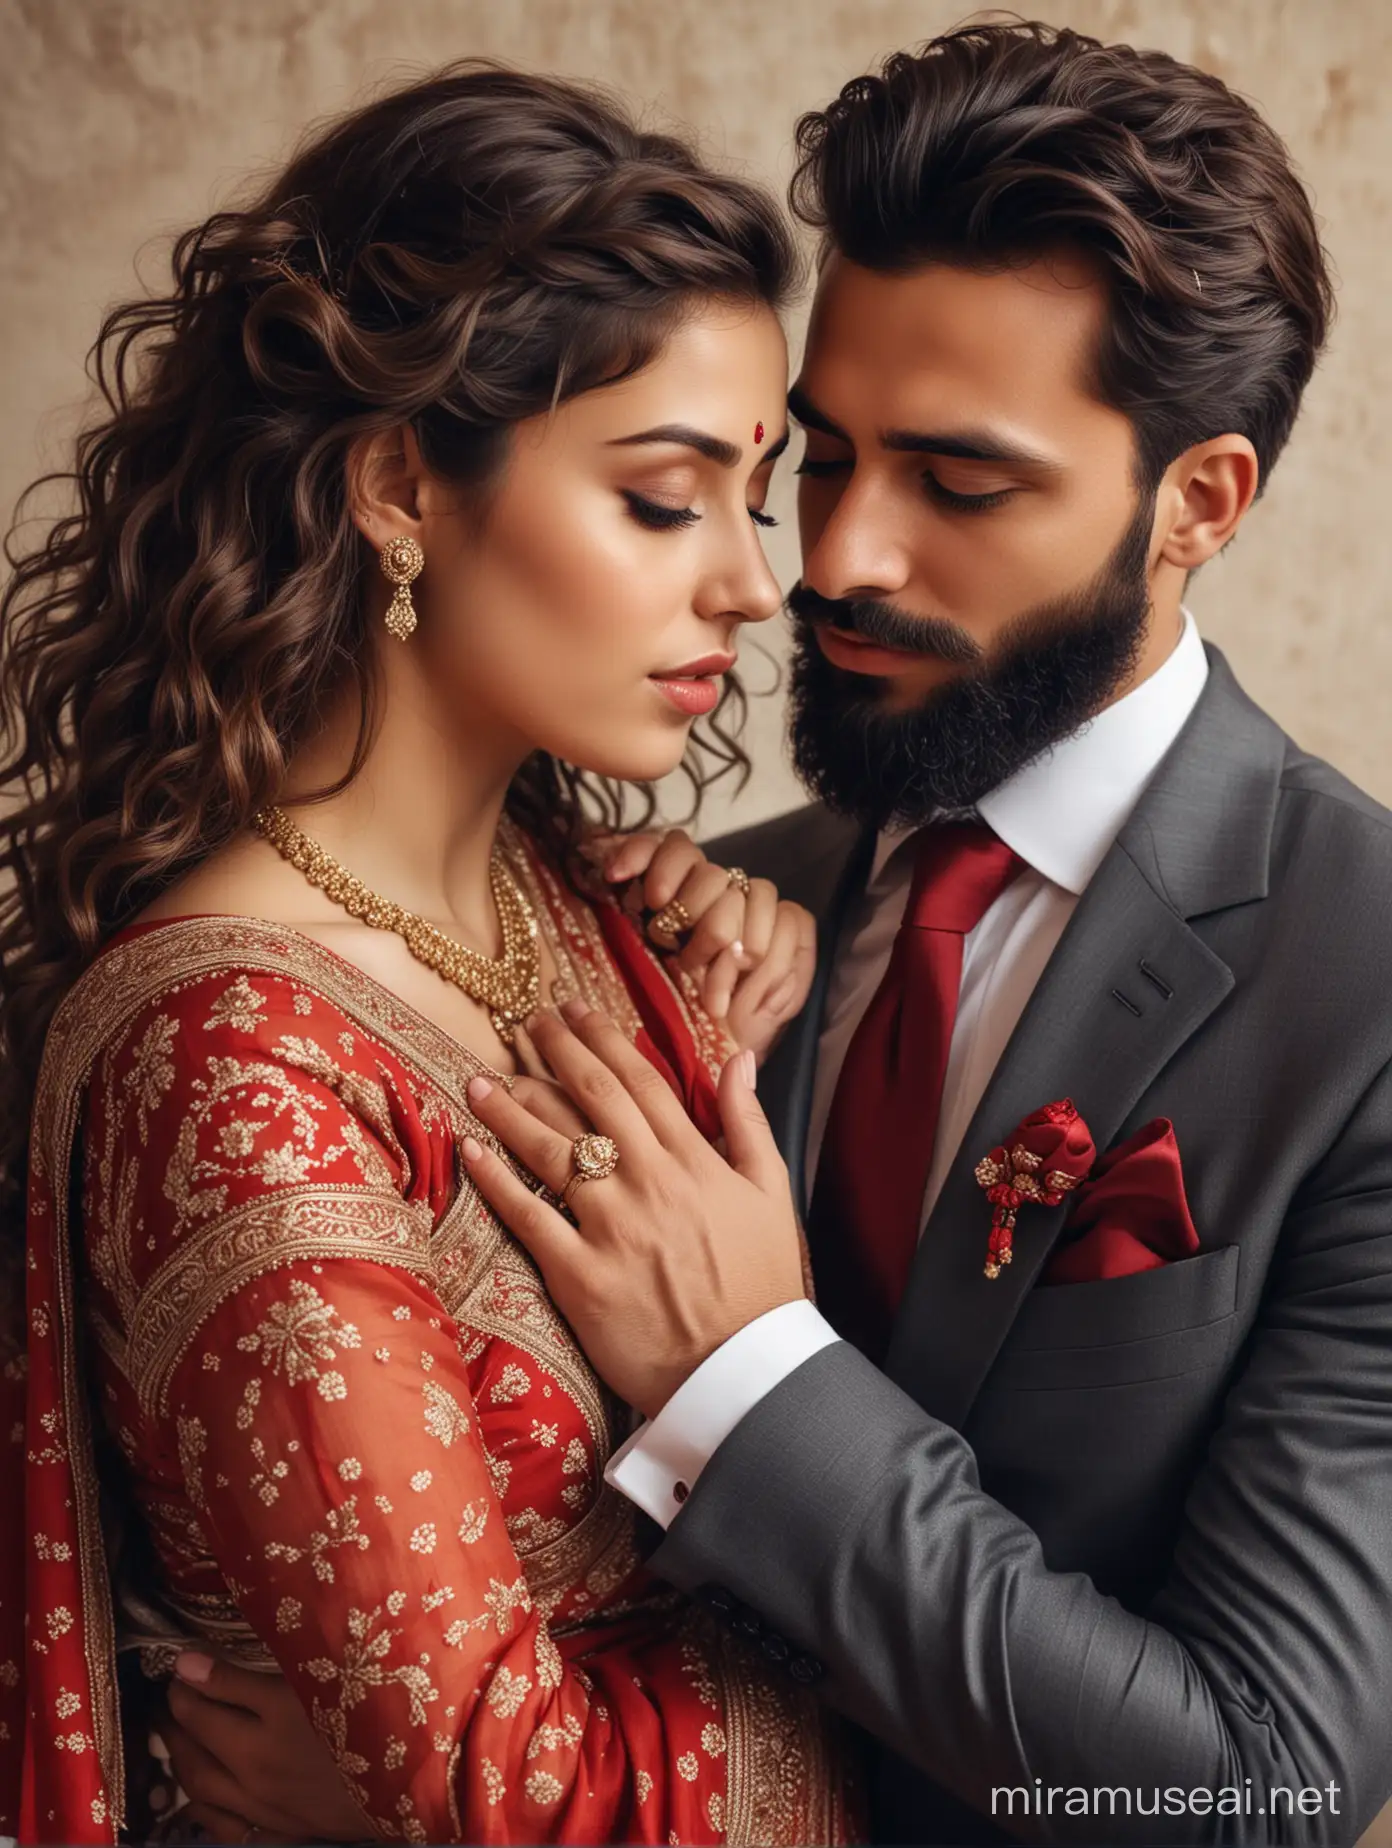 Beautiful EuropeanIndian Couple Embracing with Deep Emotion in Elegant Attire